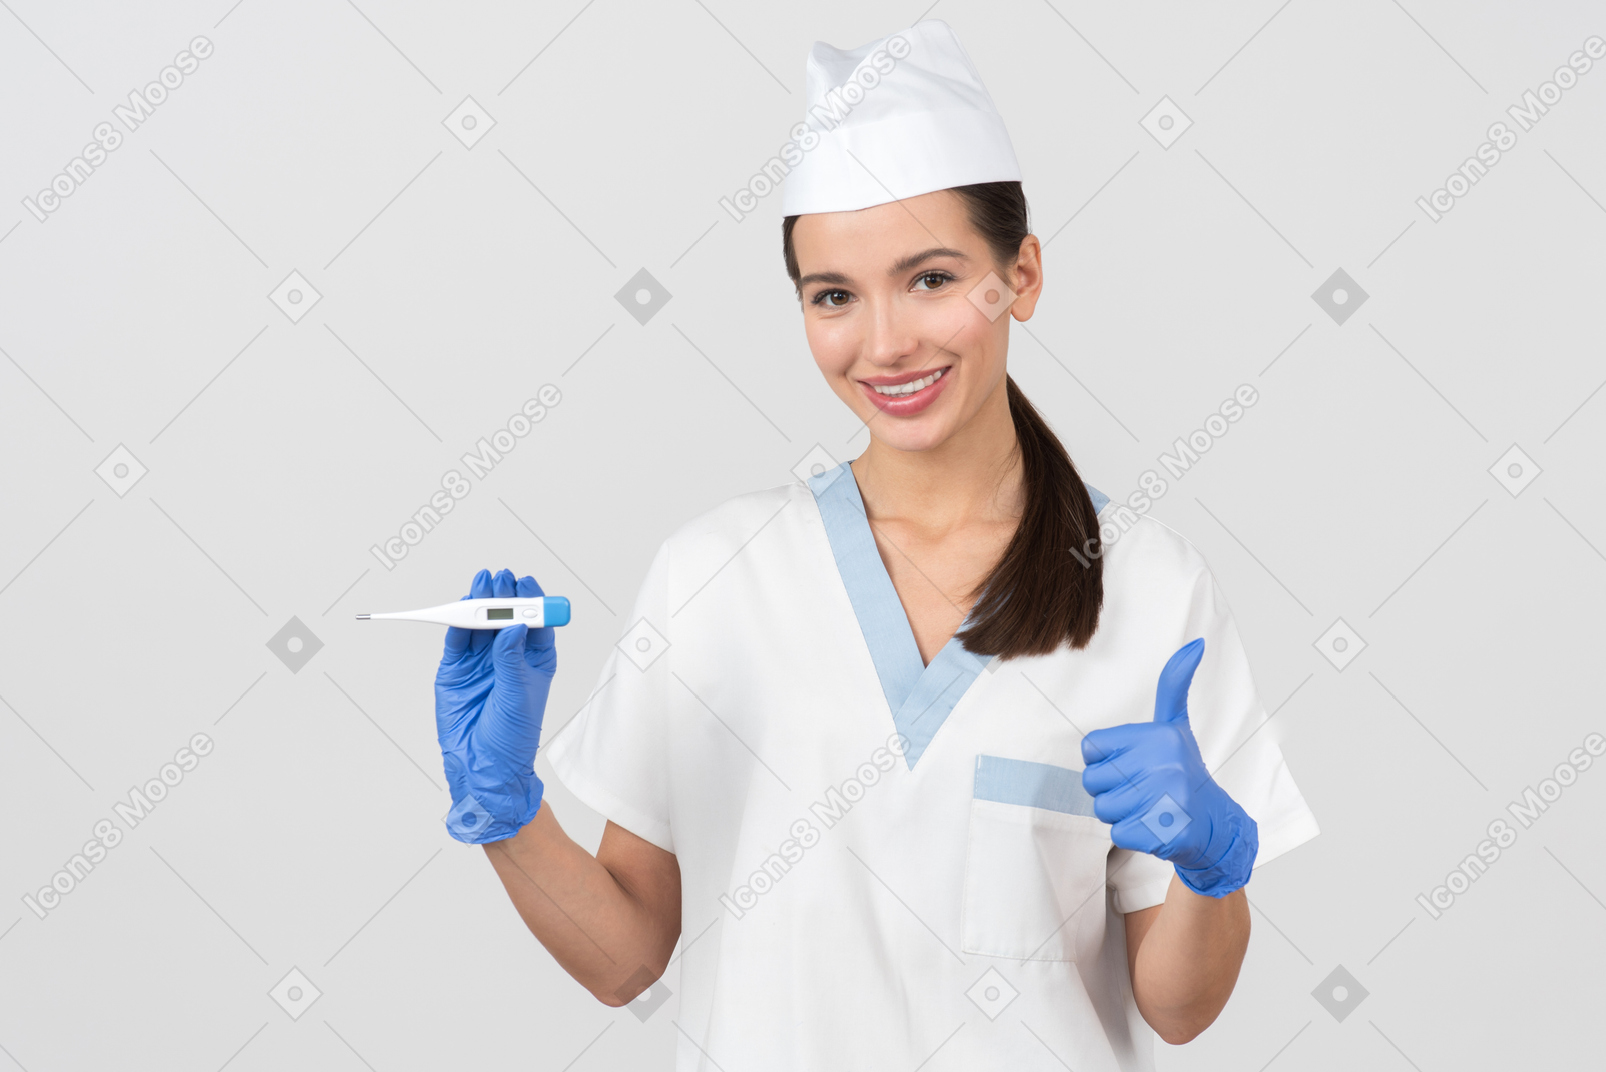 Attractive nurse showing a digital thermometer